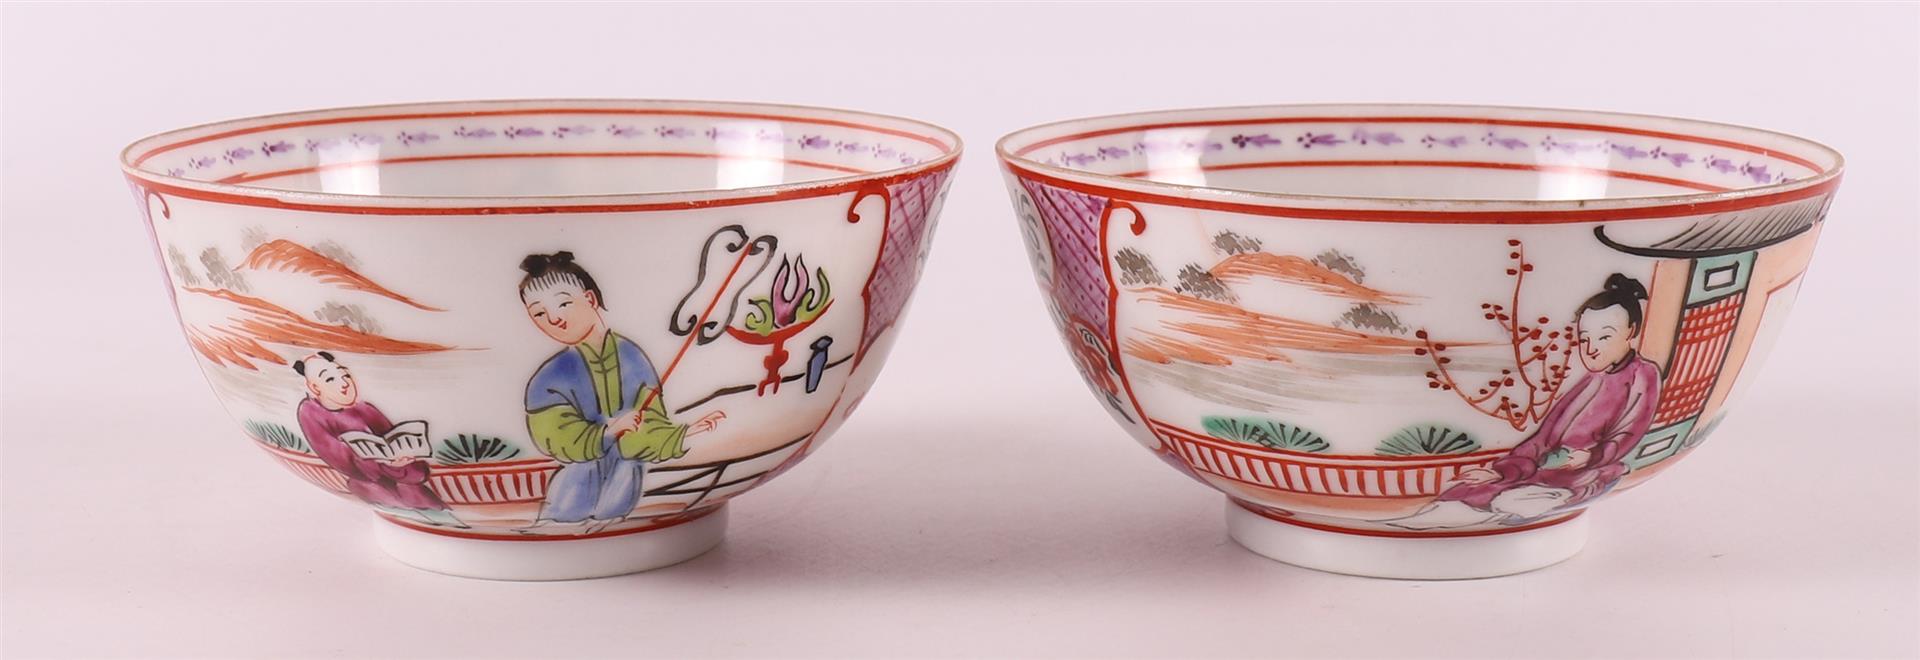 Two porcelain famille rose mandarin cups and saucers, 19th century. - Image 5 of 10